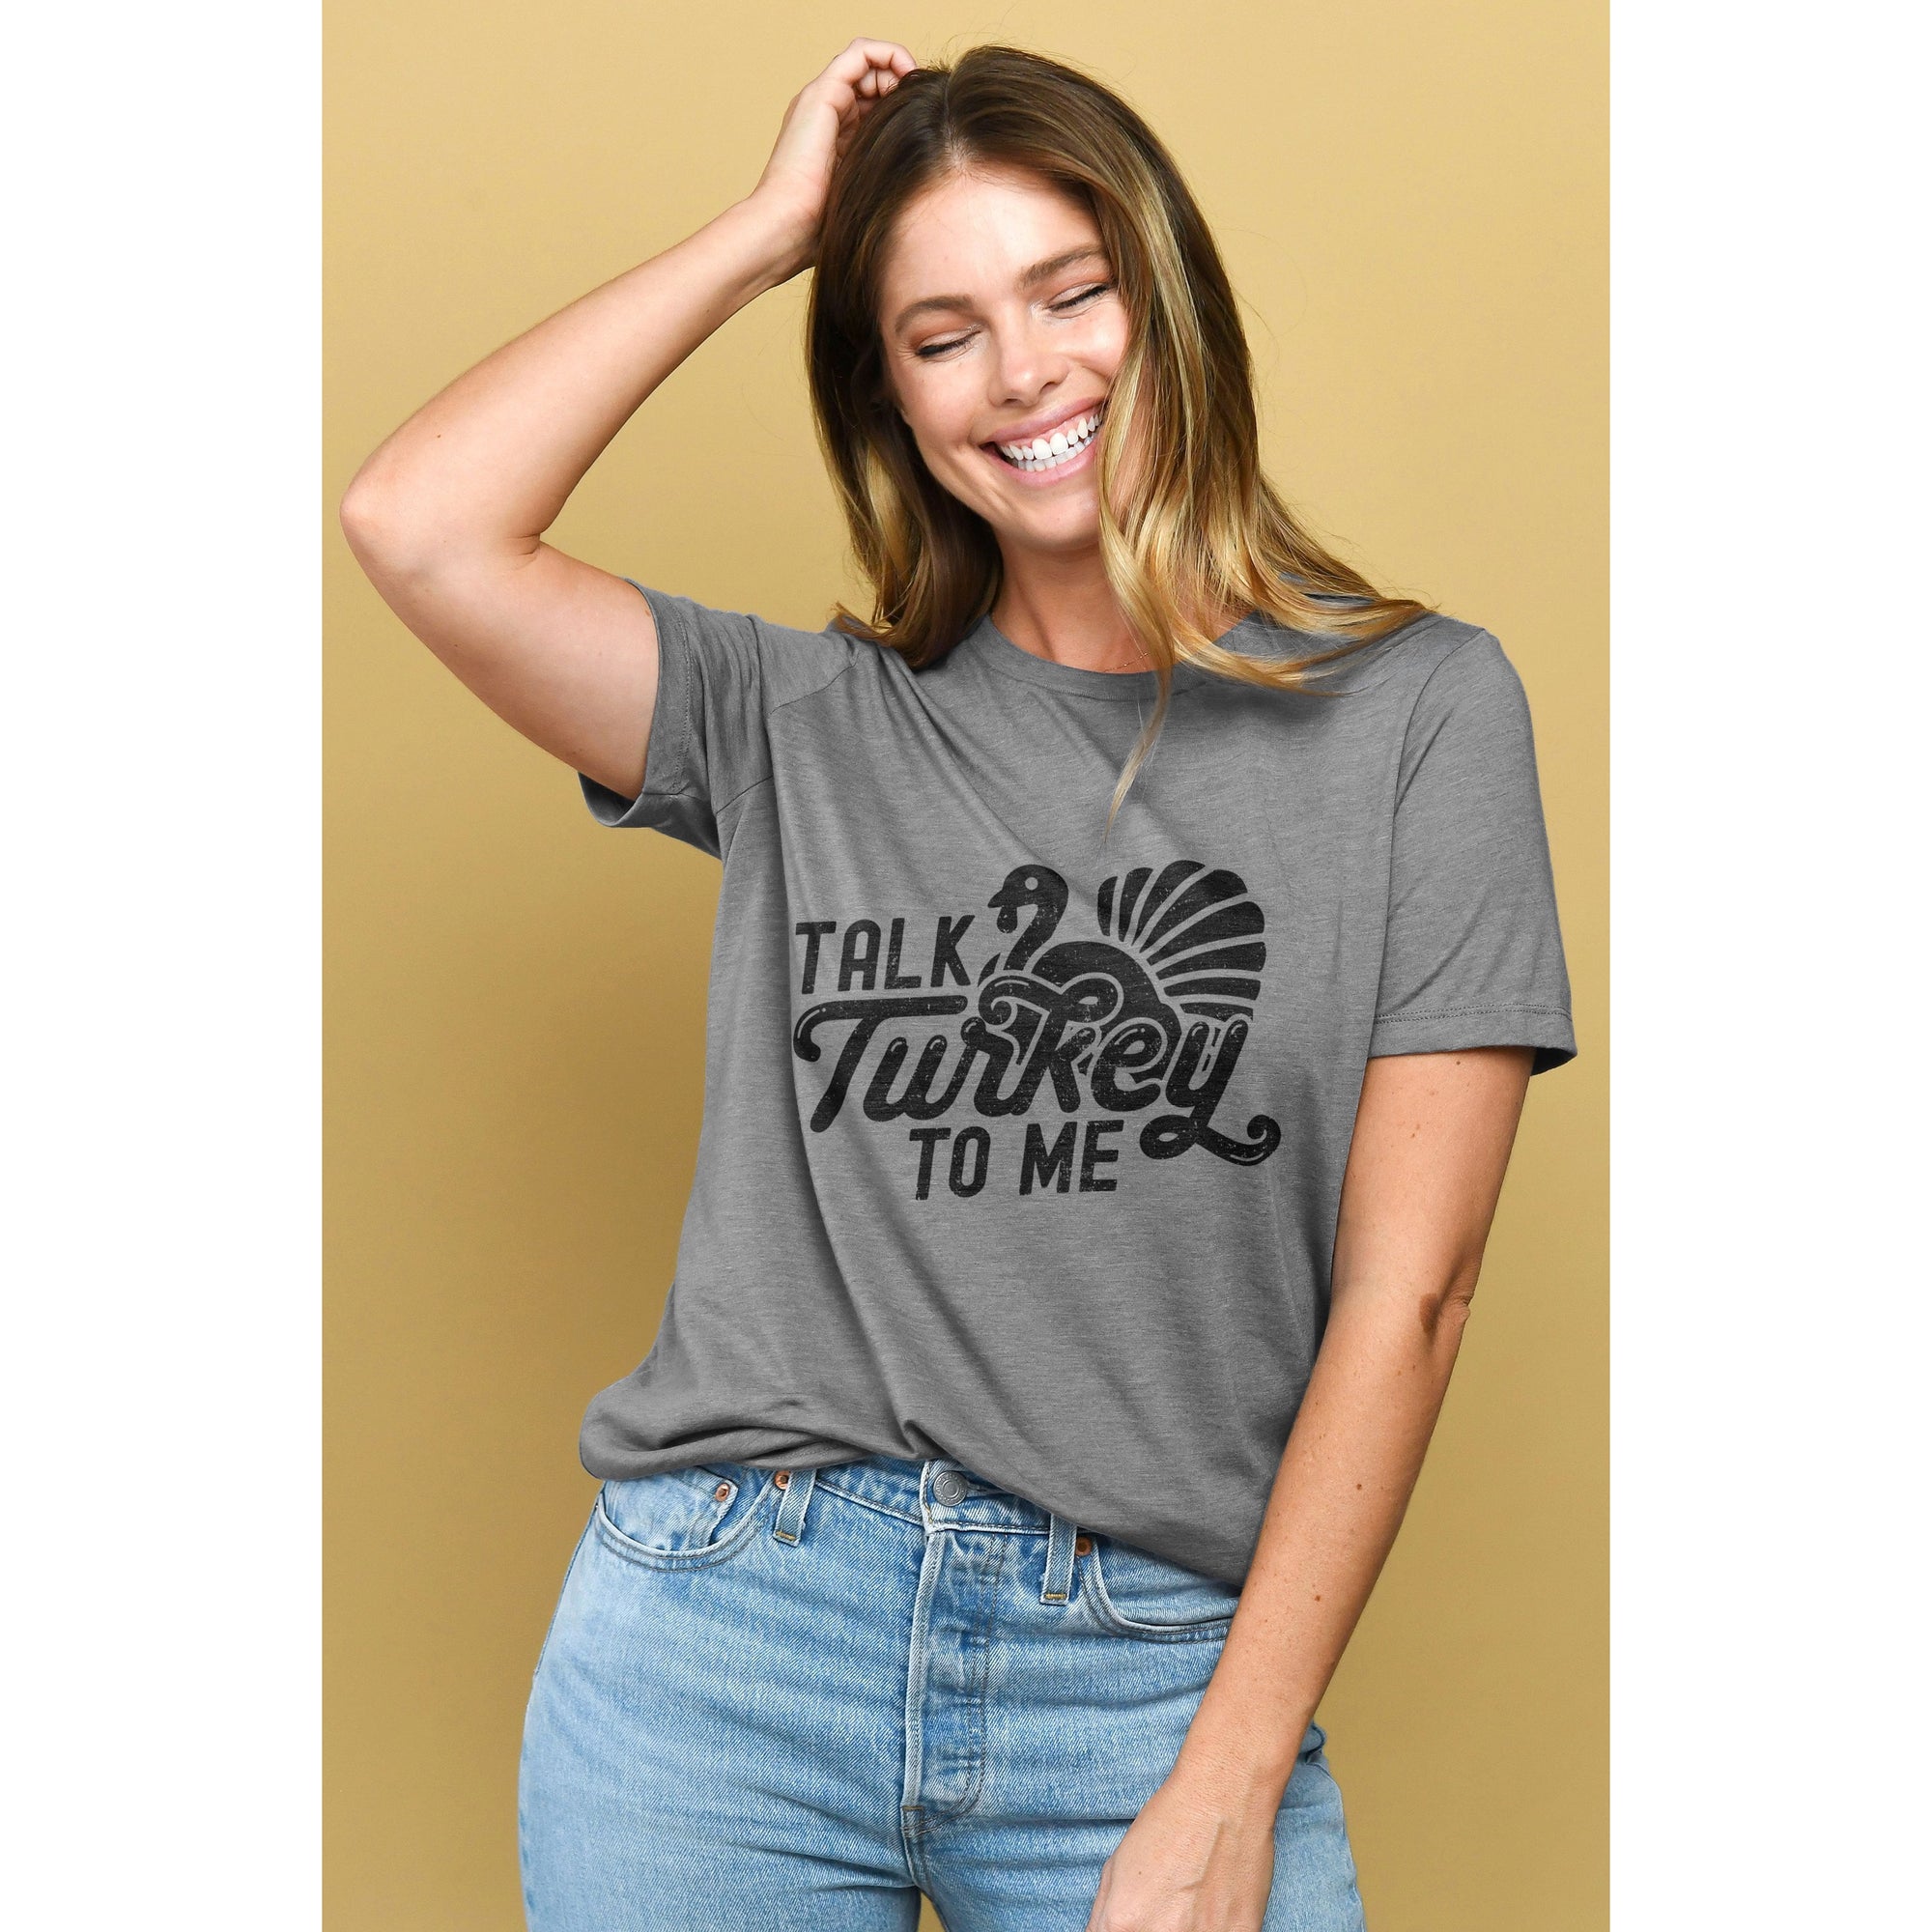 Talk Turkey To Me - thread tank | Stories you can wear.